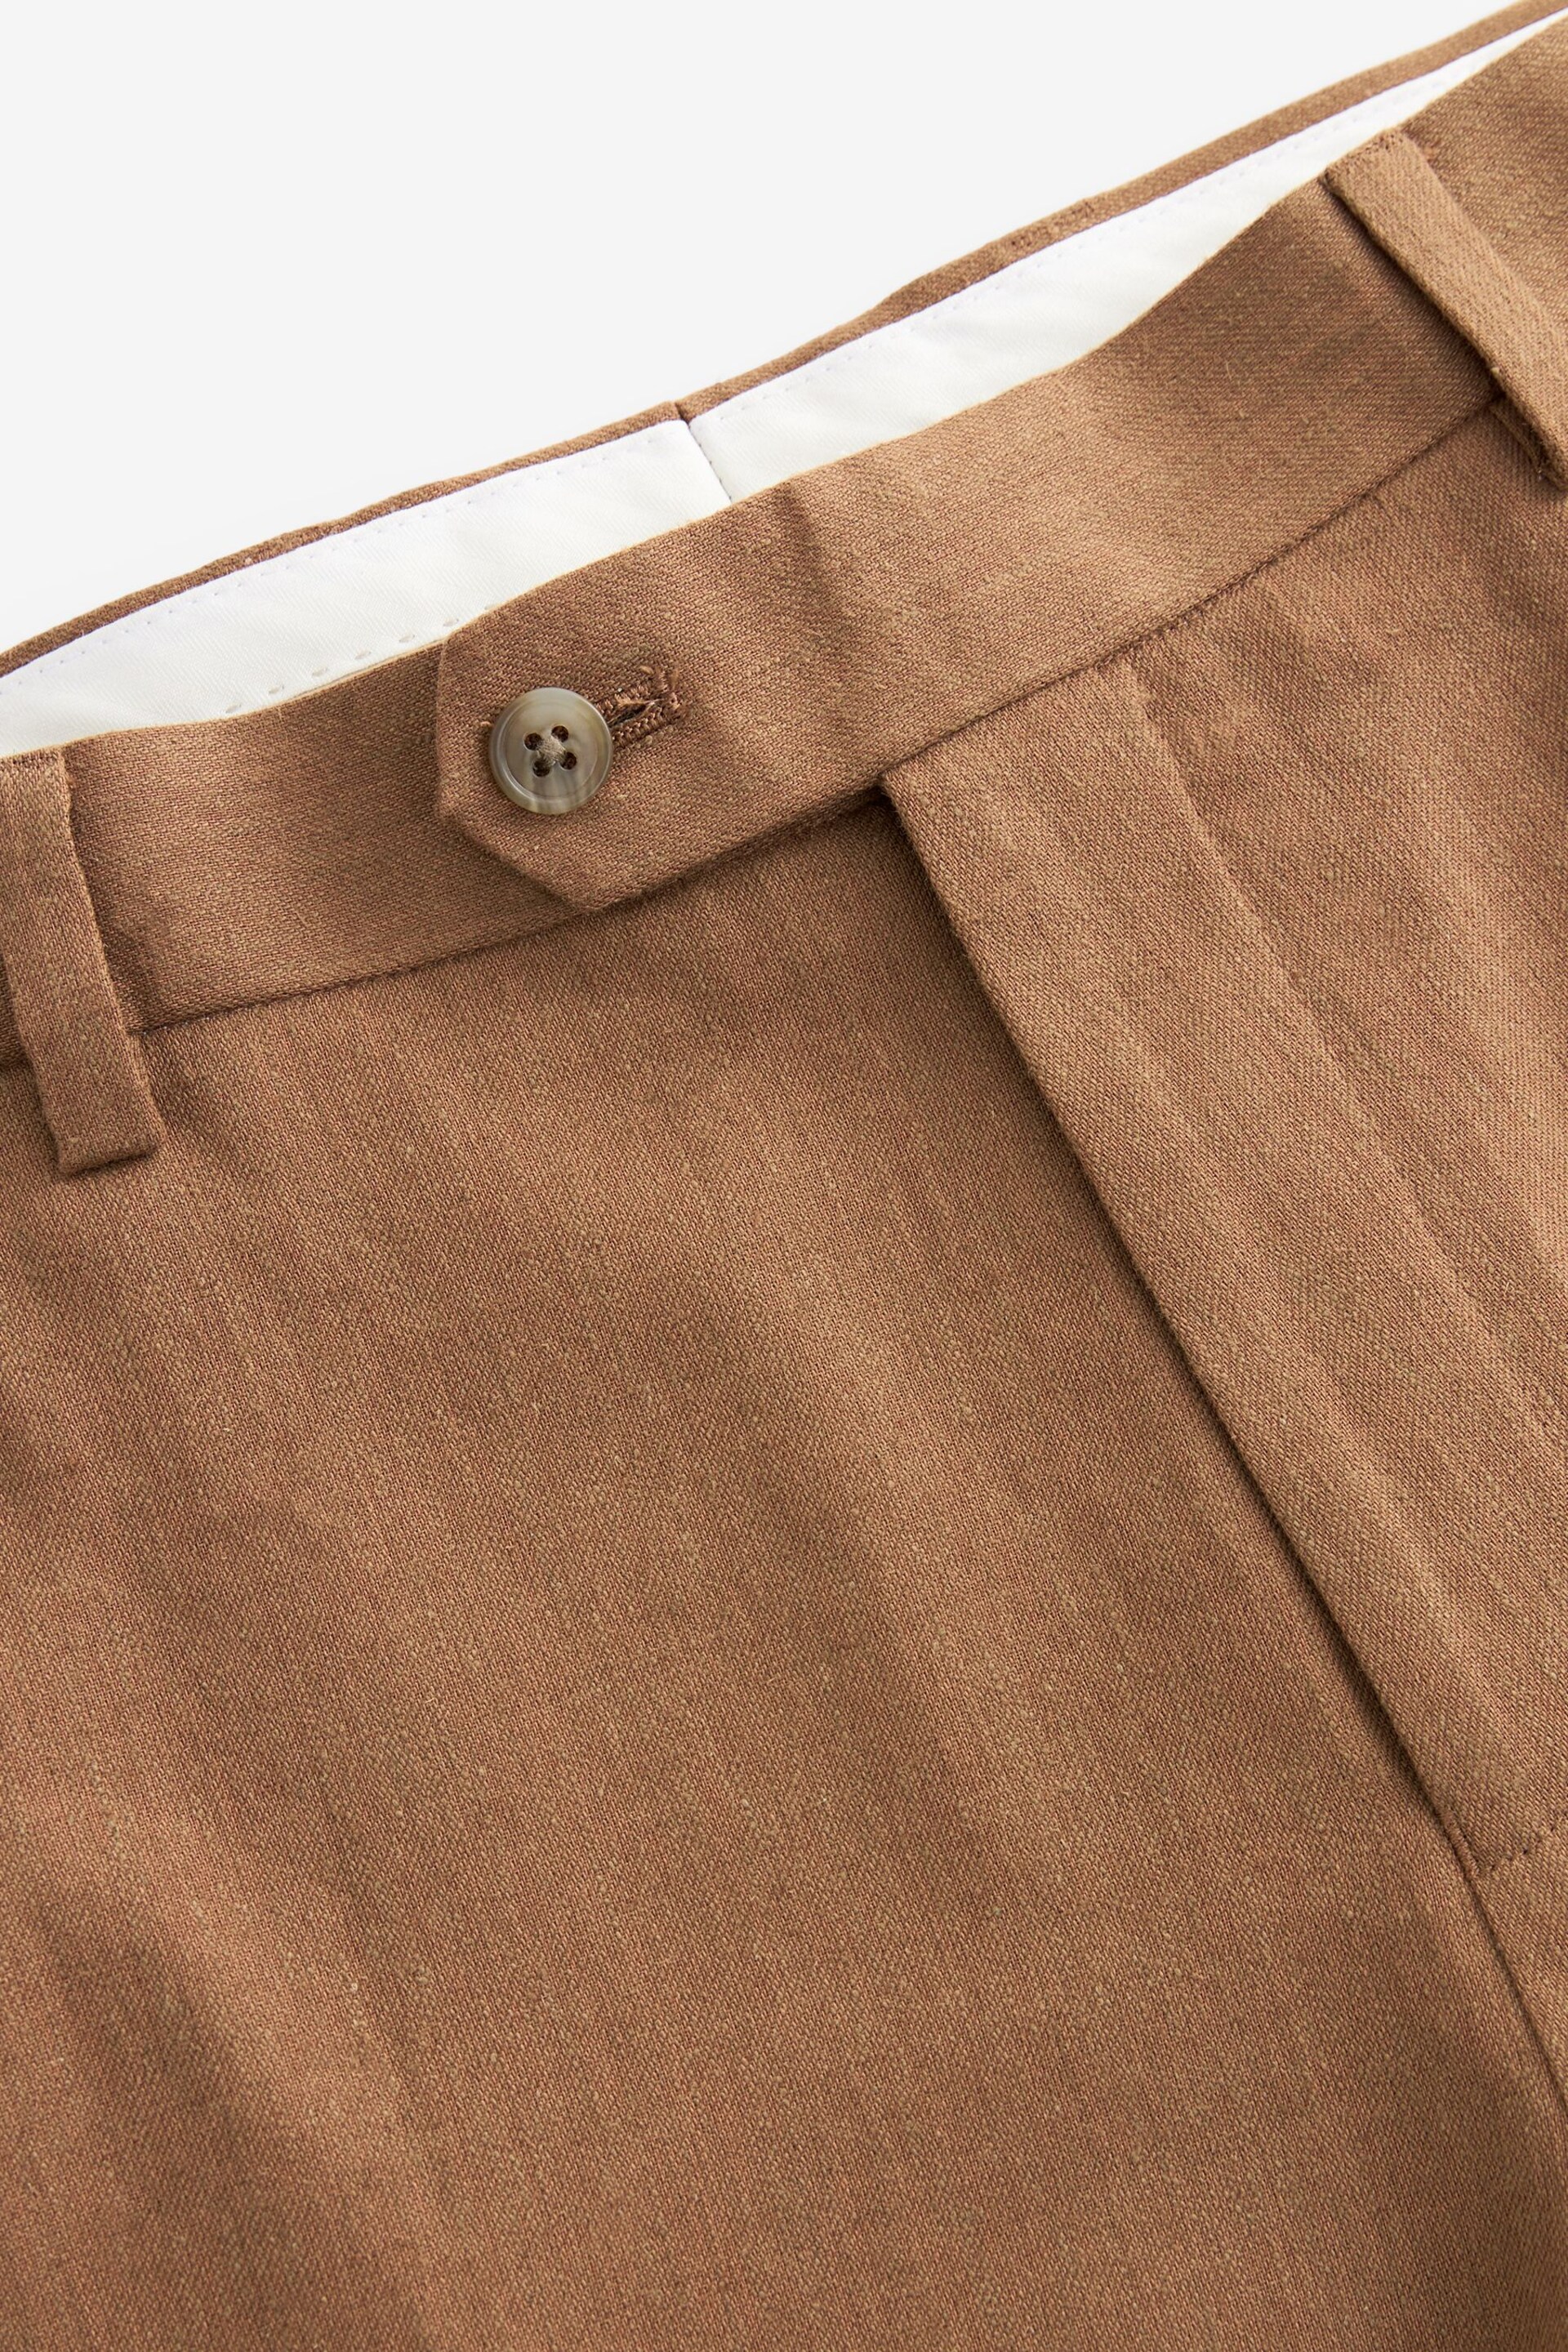 Rust Brown Linen Tailored Fit Suit: Trousers - Image 8 of 8